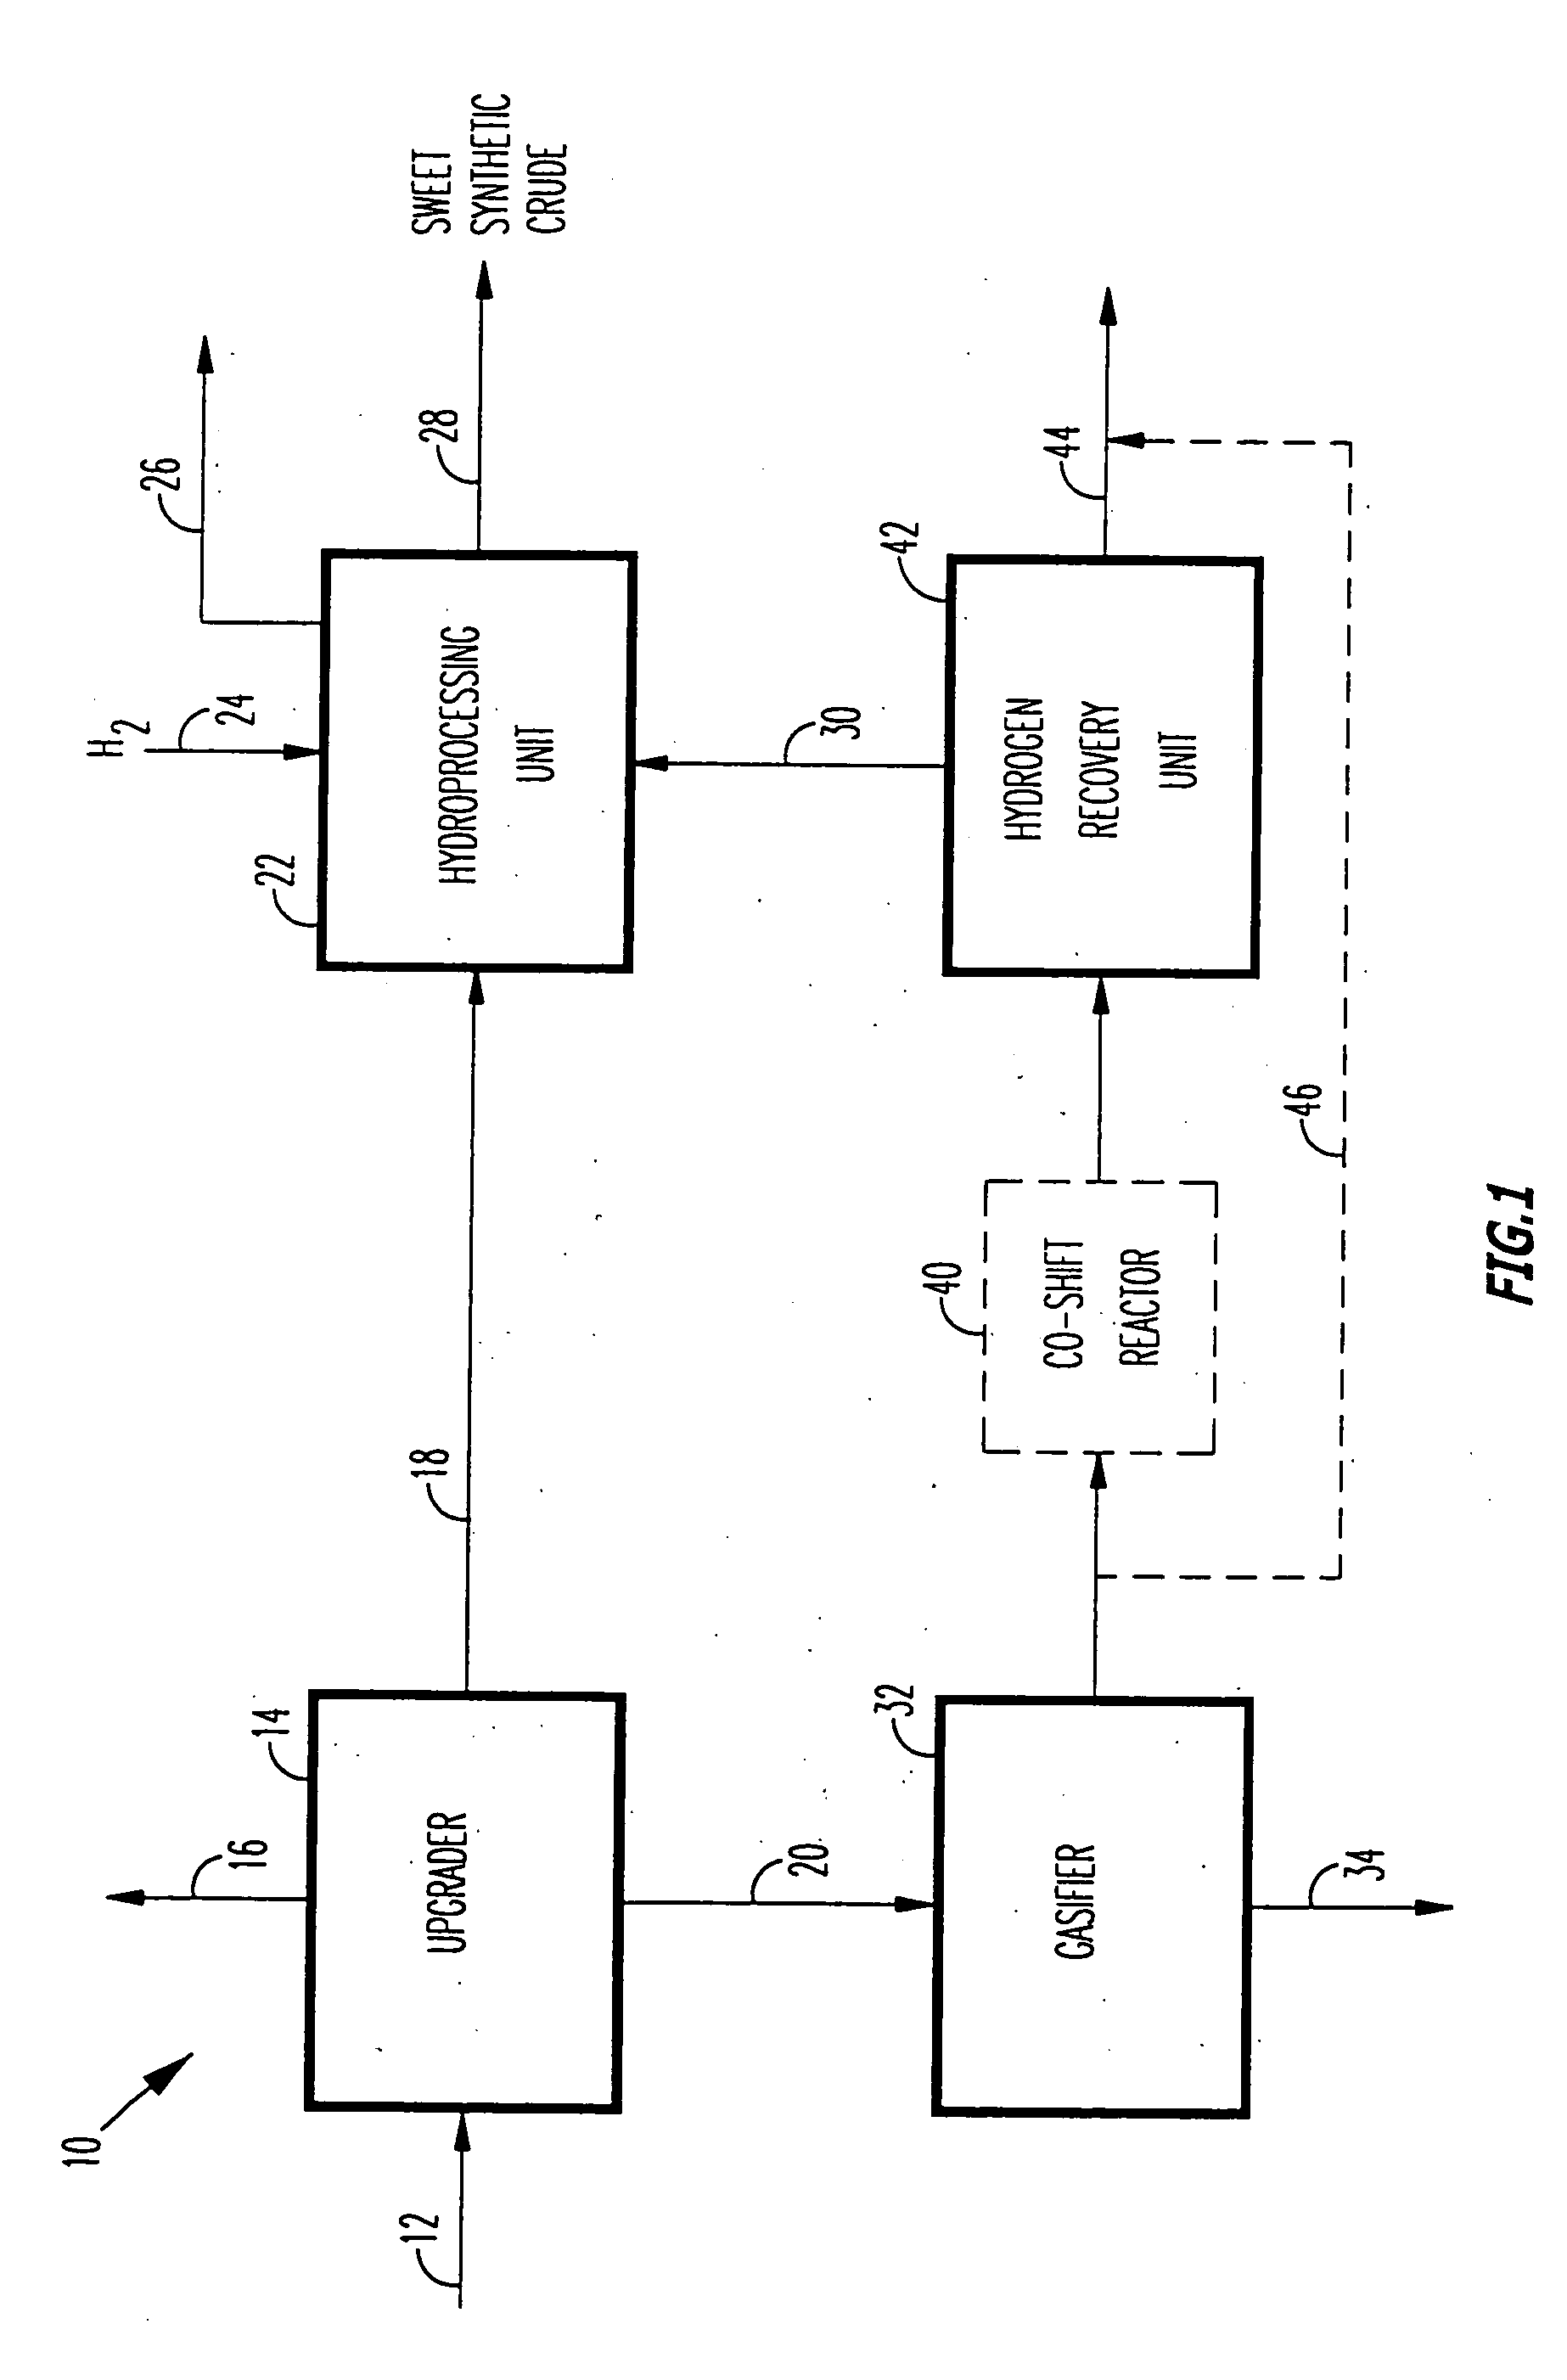 Method of and apparatus for upgrading and gasifying heavy hydrocarbon feeds